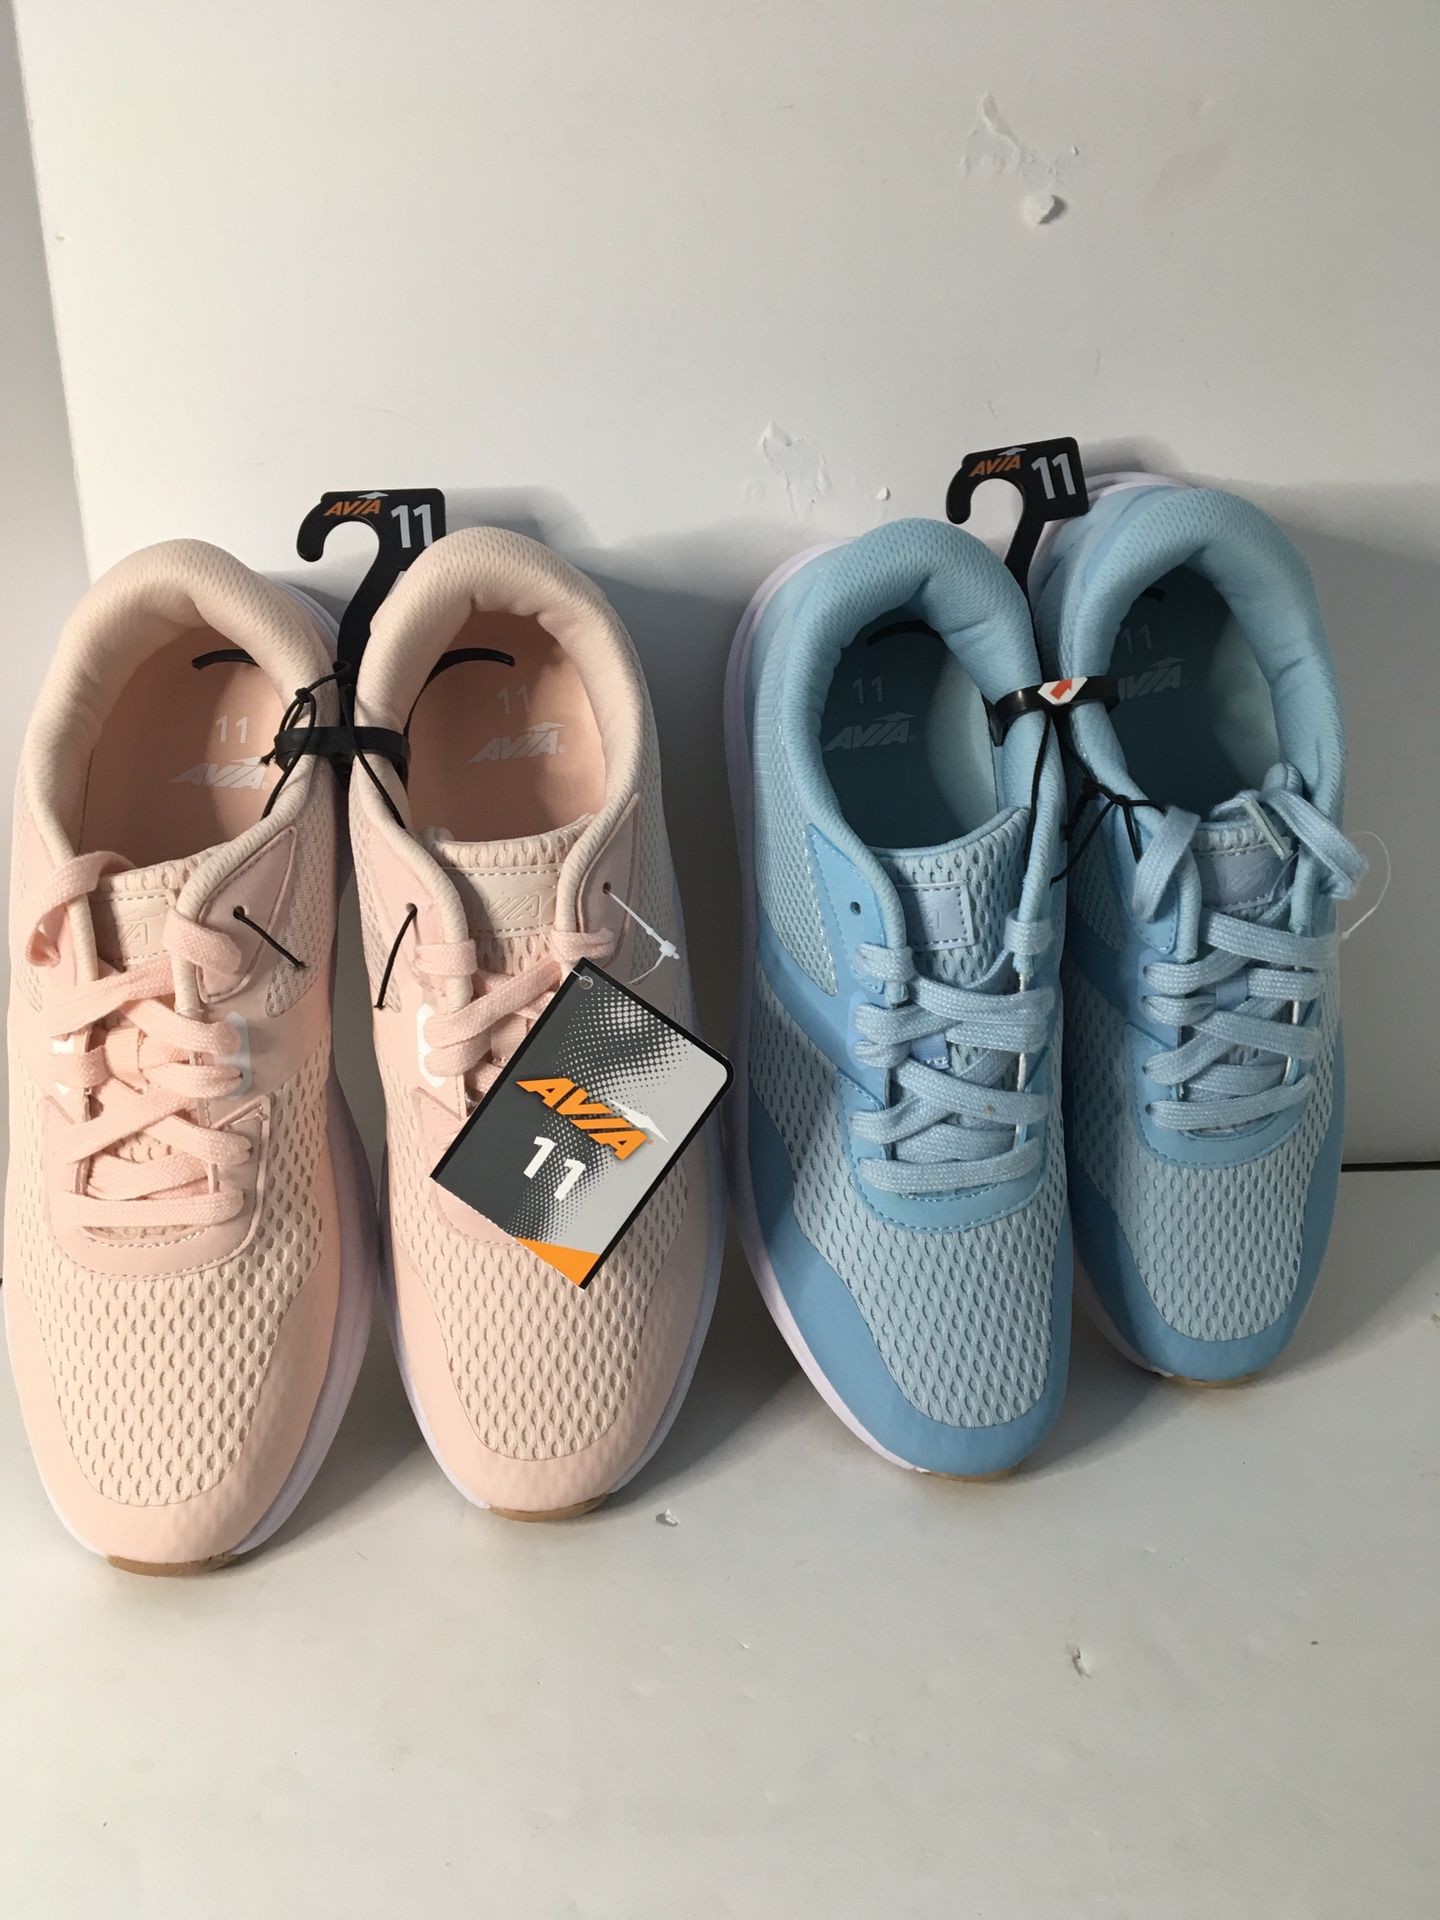 New. 2 Pair Women's Size 11 Avia Athletic Shoes Pink/baby Blue for